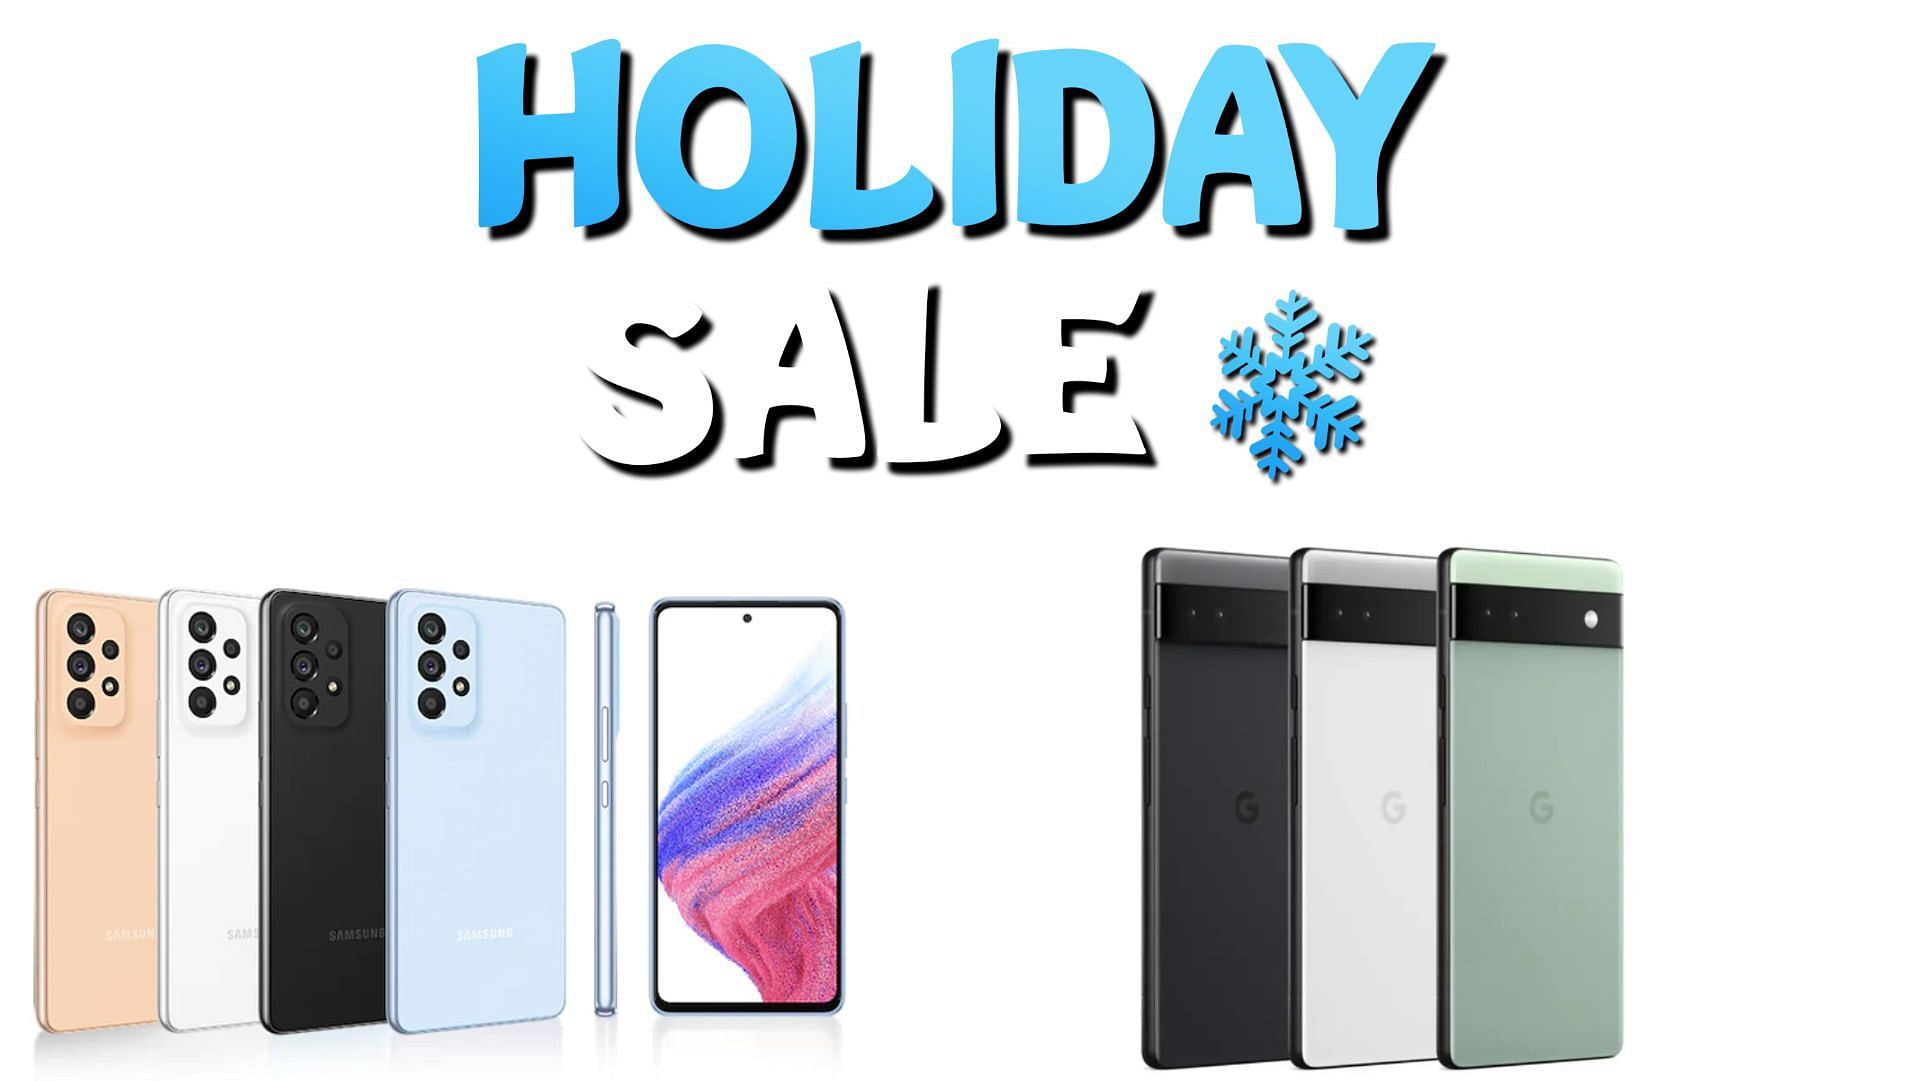 Which is the better mid-ranger to get this Holiday Sale? (image by Google and Samsung)